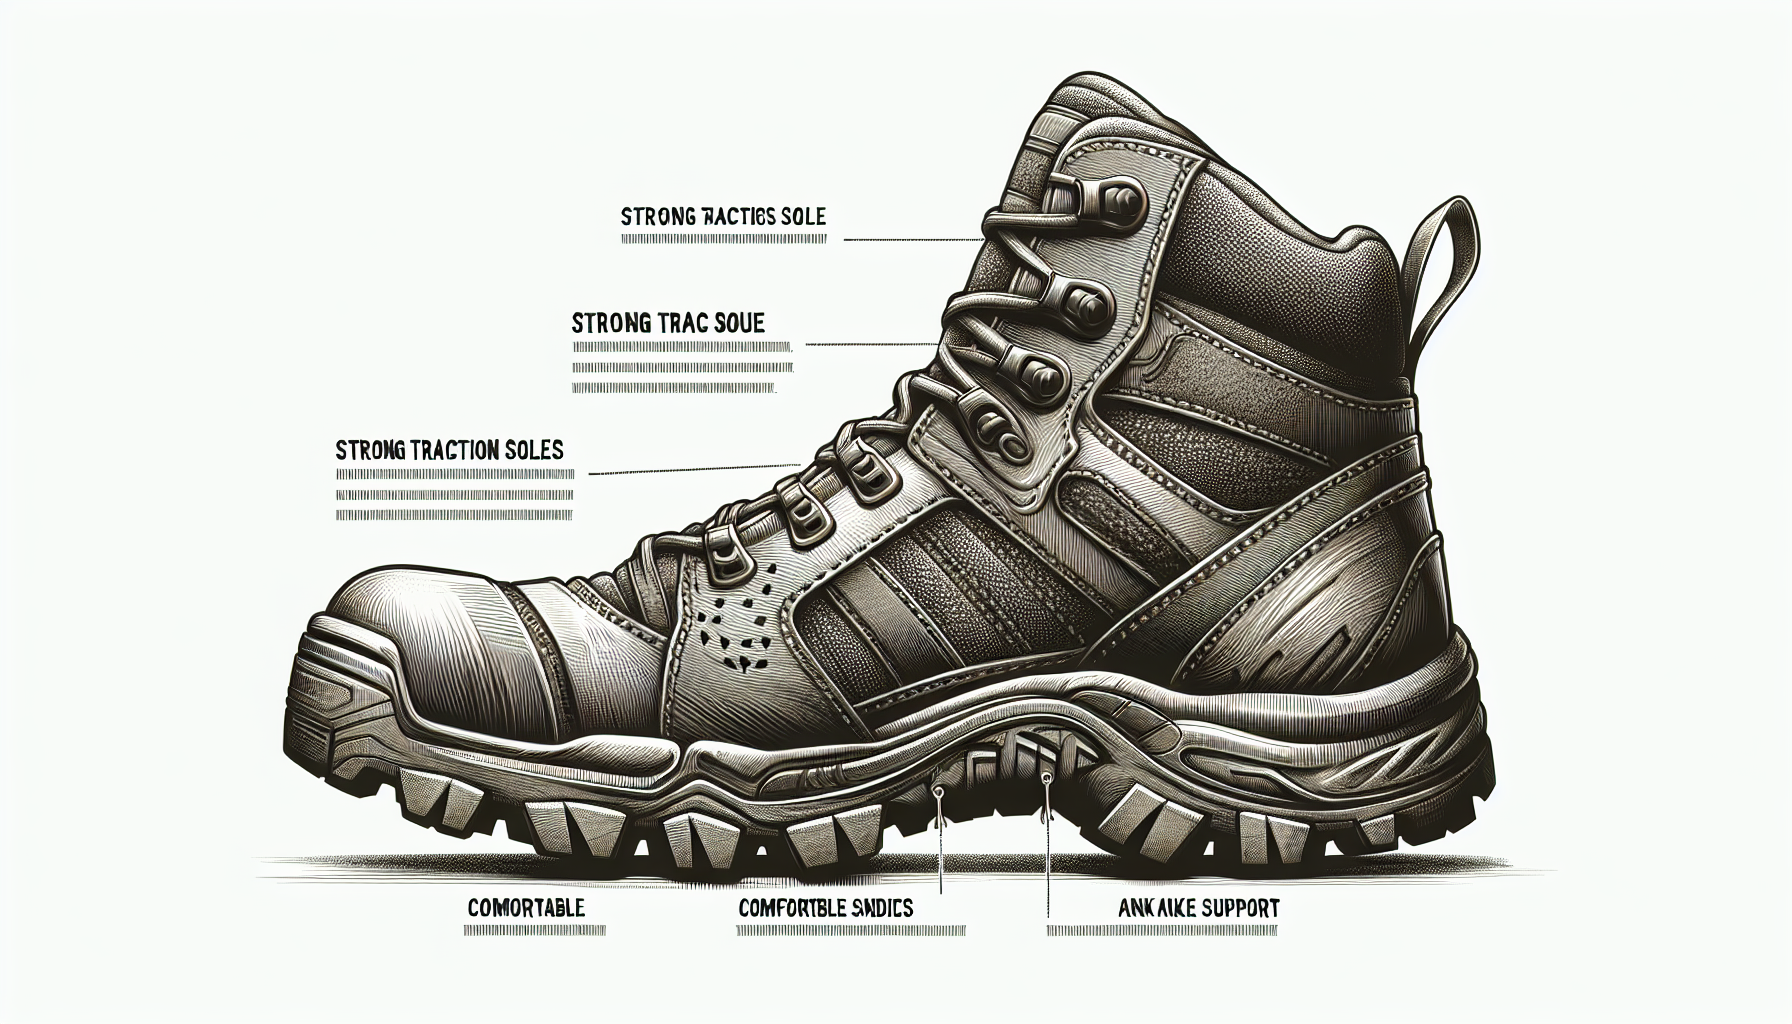 Key Features To Look For When Buying Tactical Boots